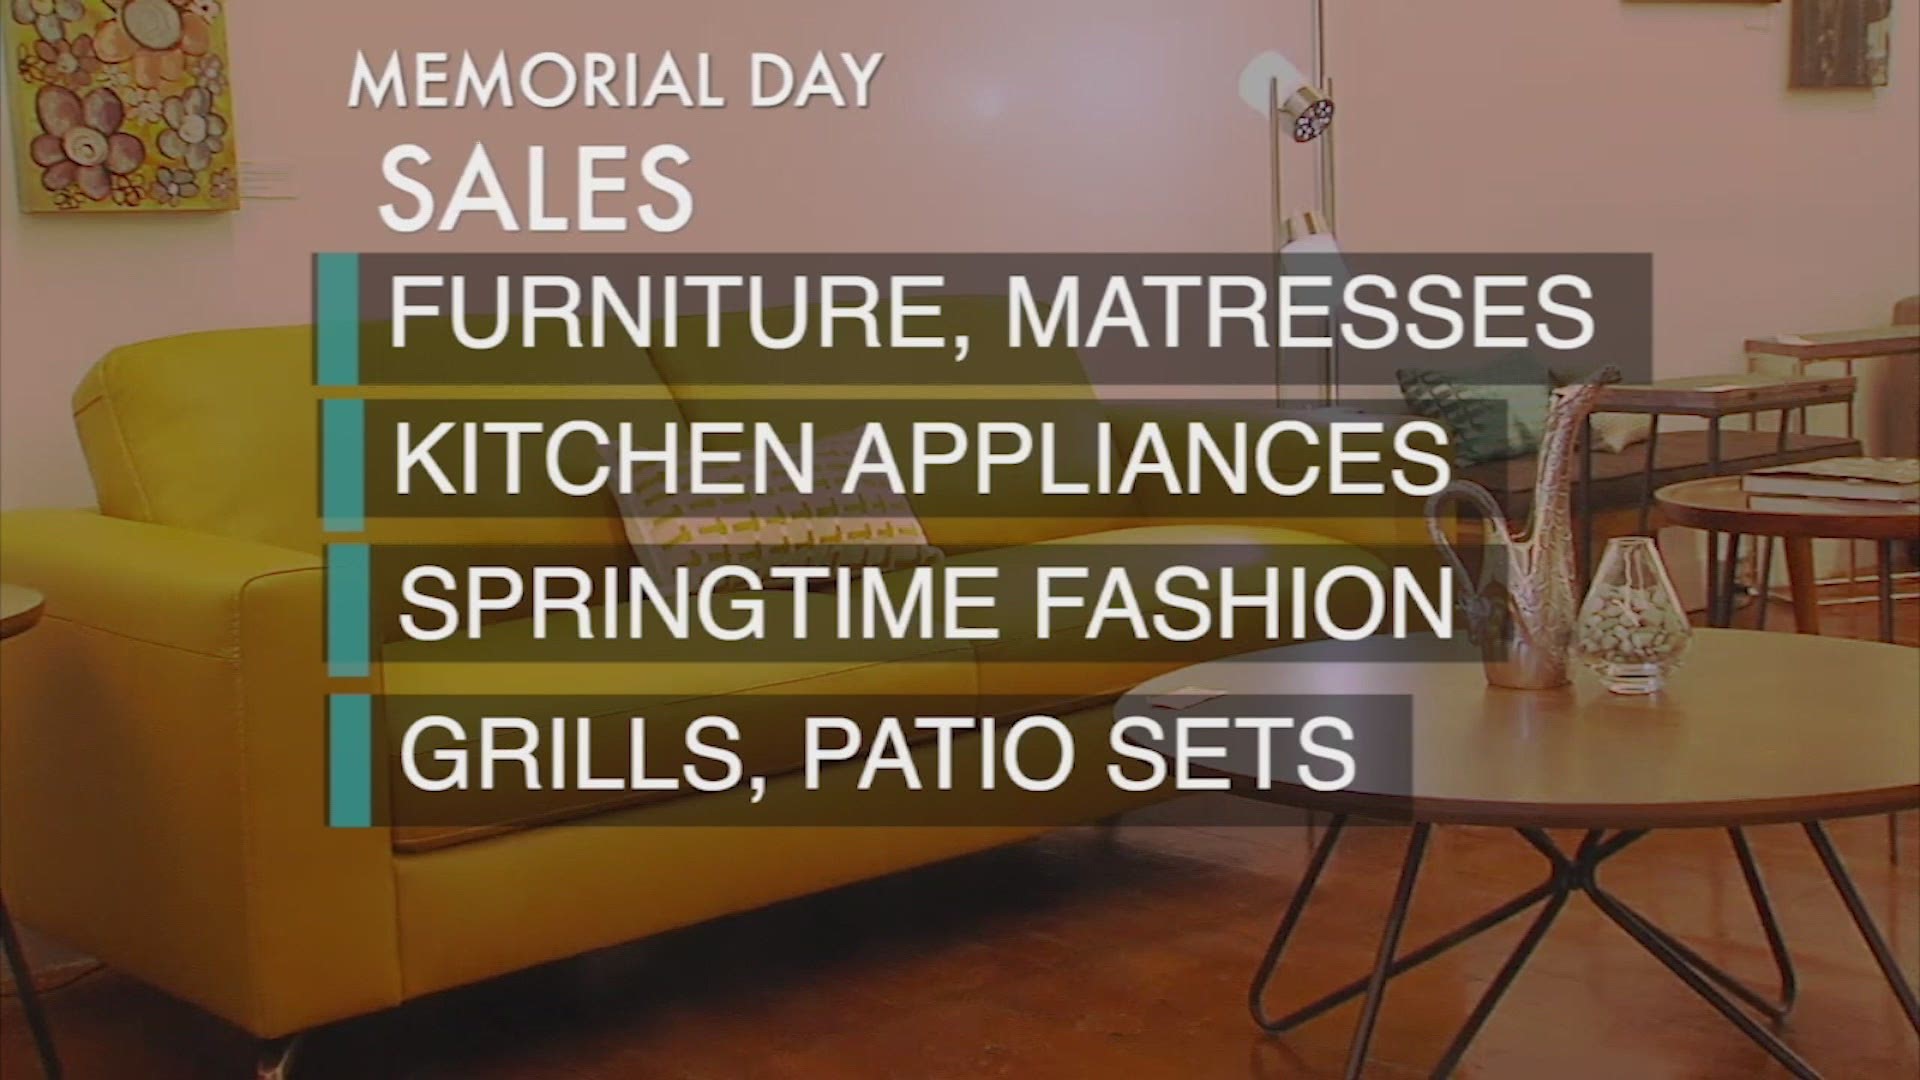 It's almost Memorial Day, and that means some of the biggest sales of the year. But make sure you find out if that great Memorial Day deal is actually in stock.